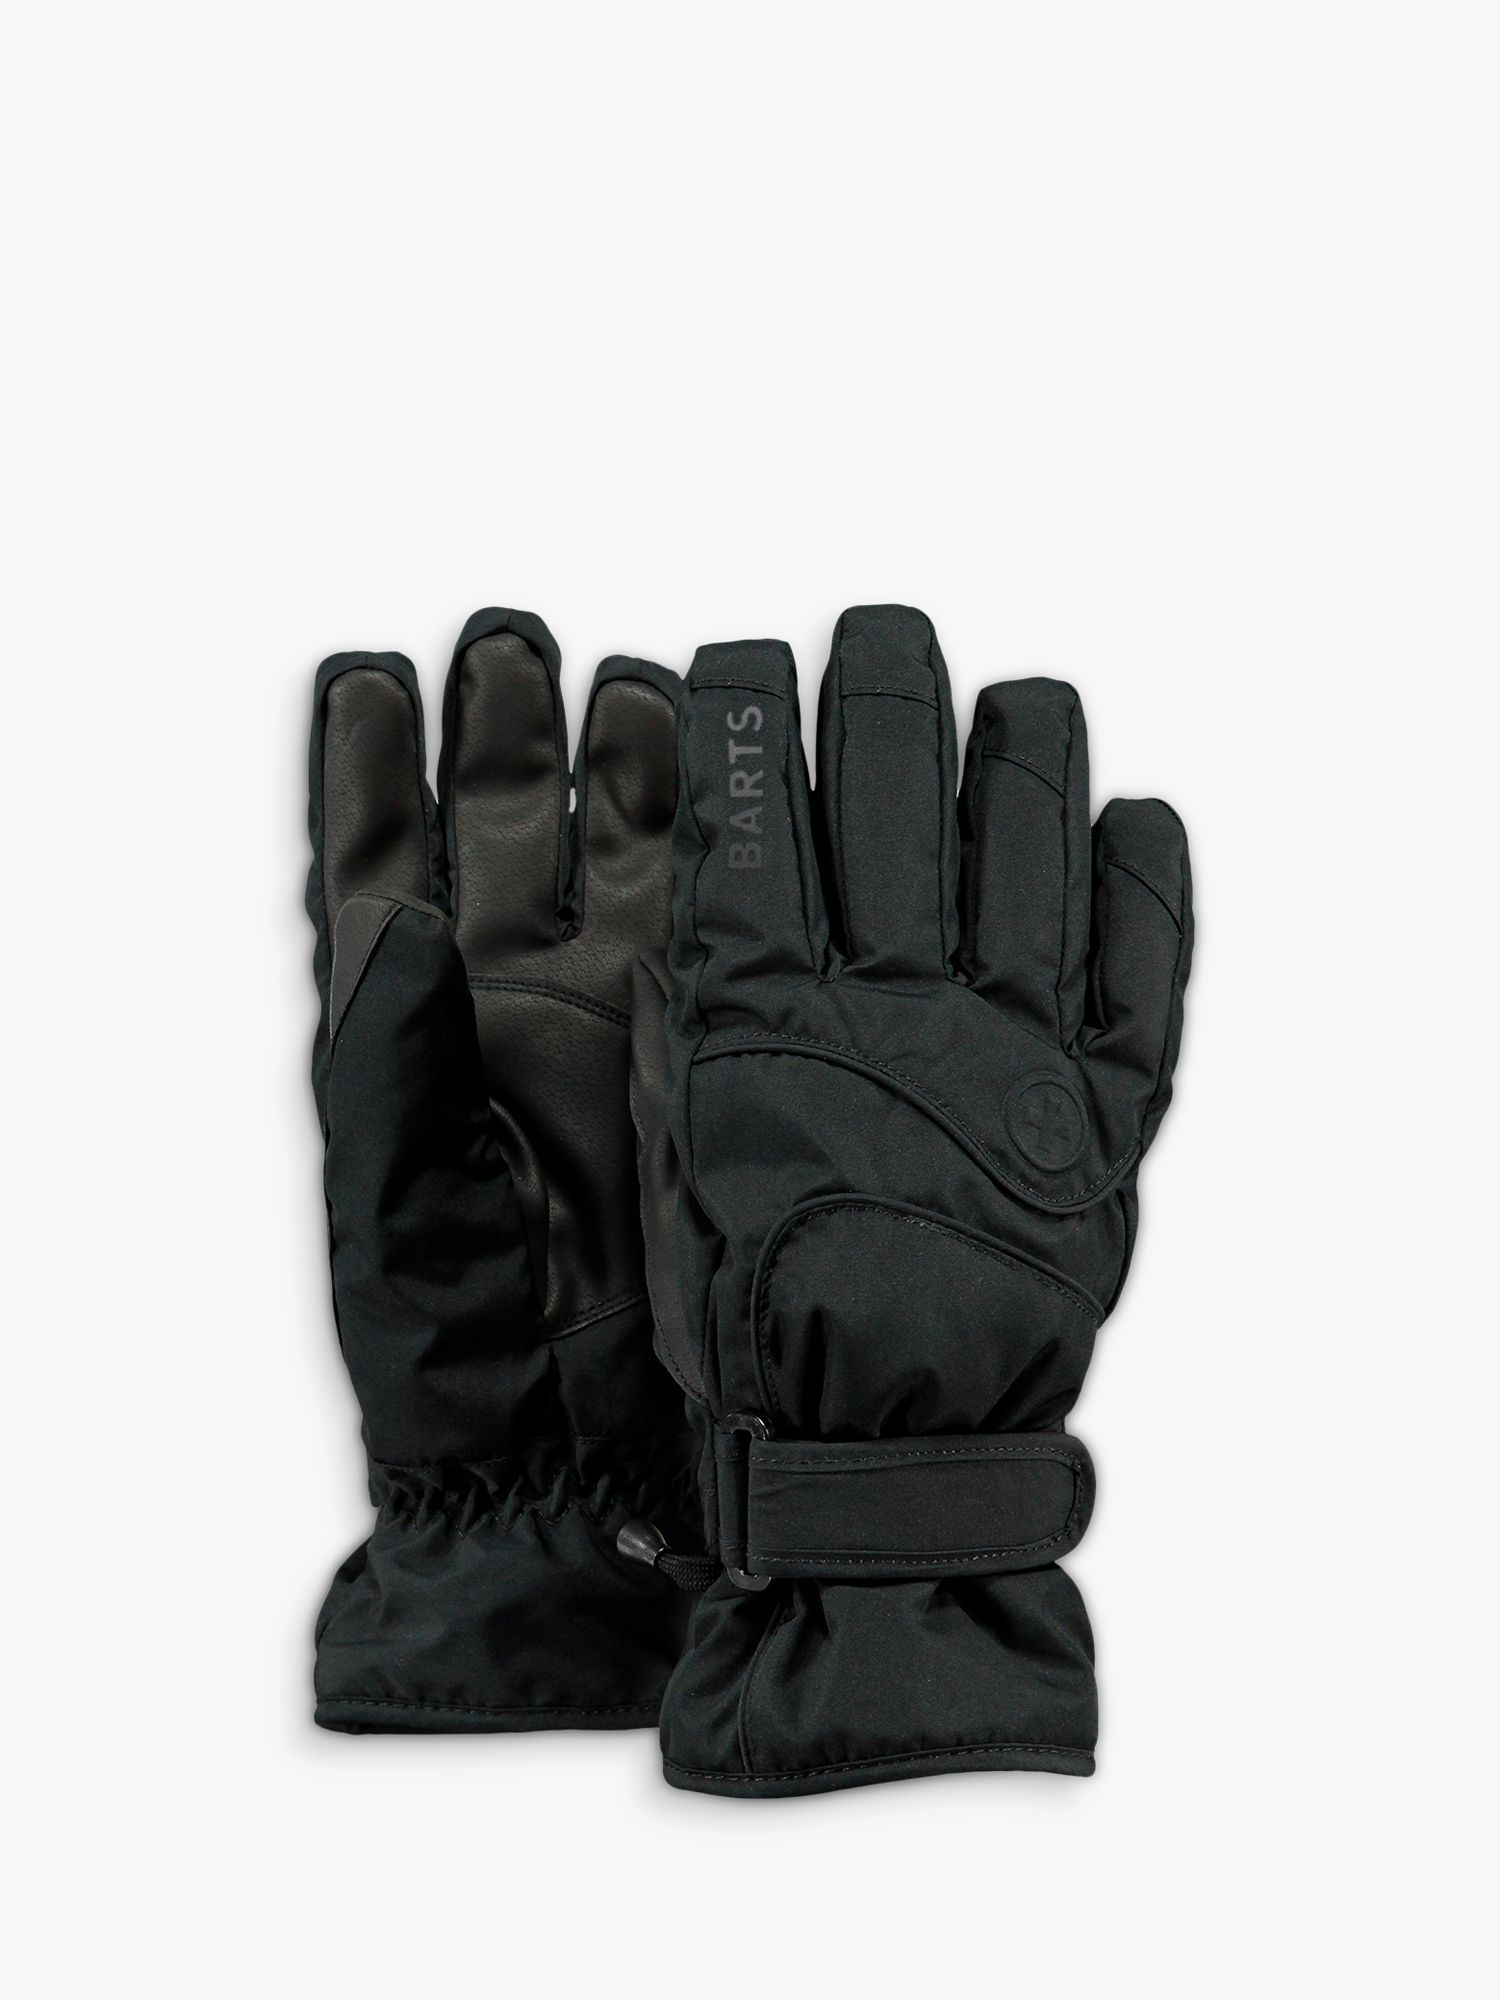 Full leather SHELL Sport Accessories Gloves & Mittens Sports Gloves 